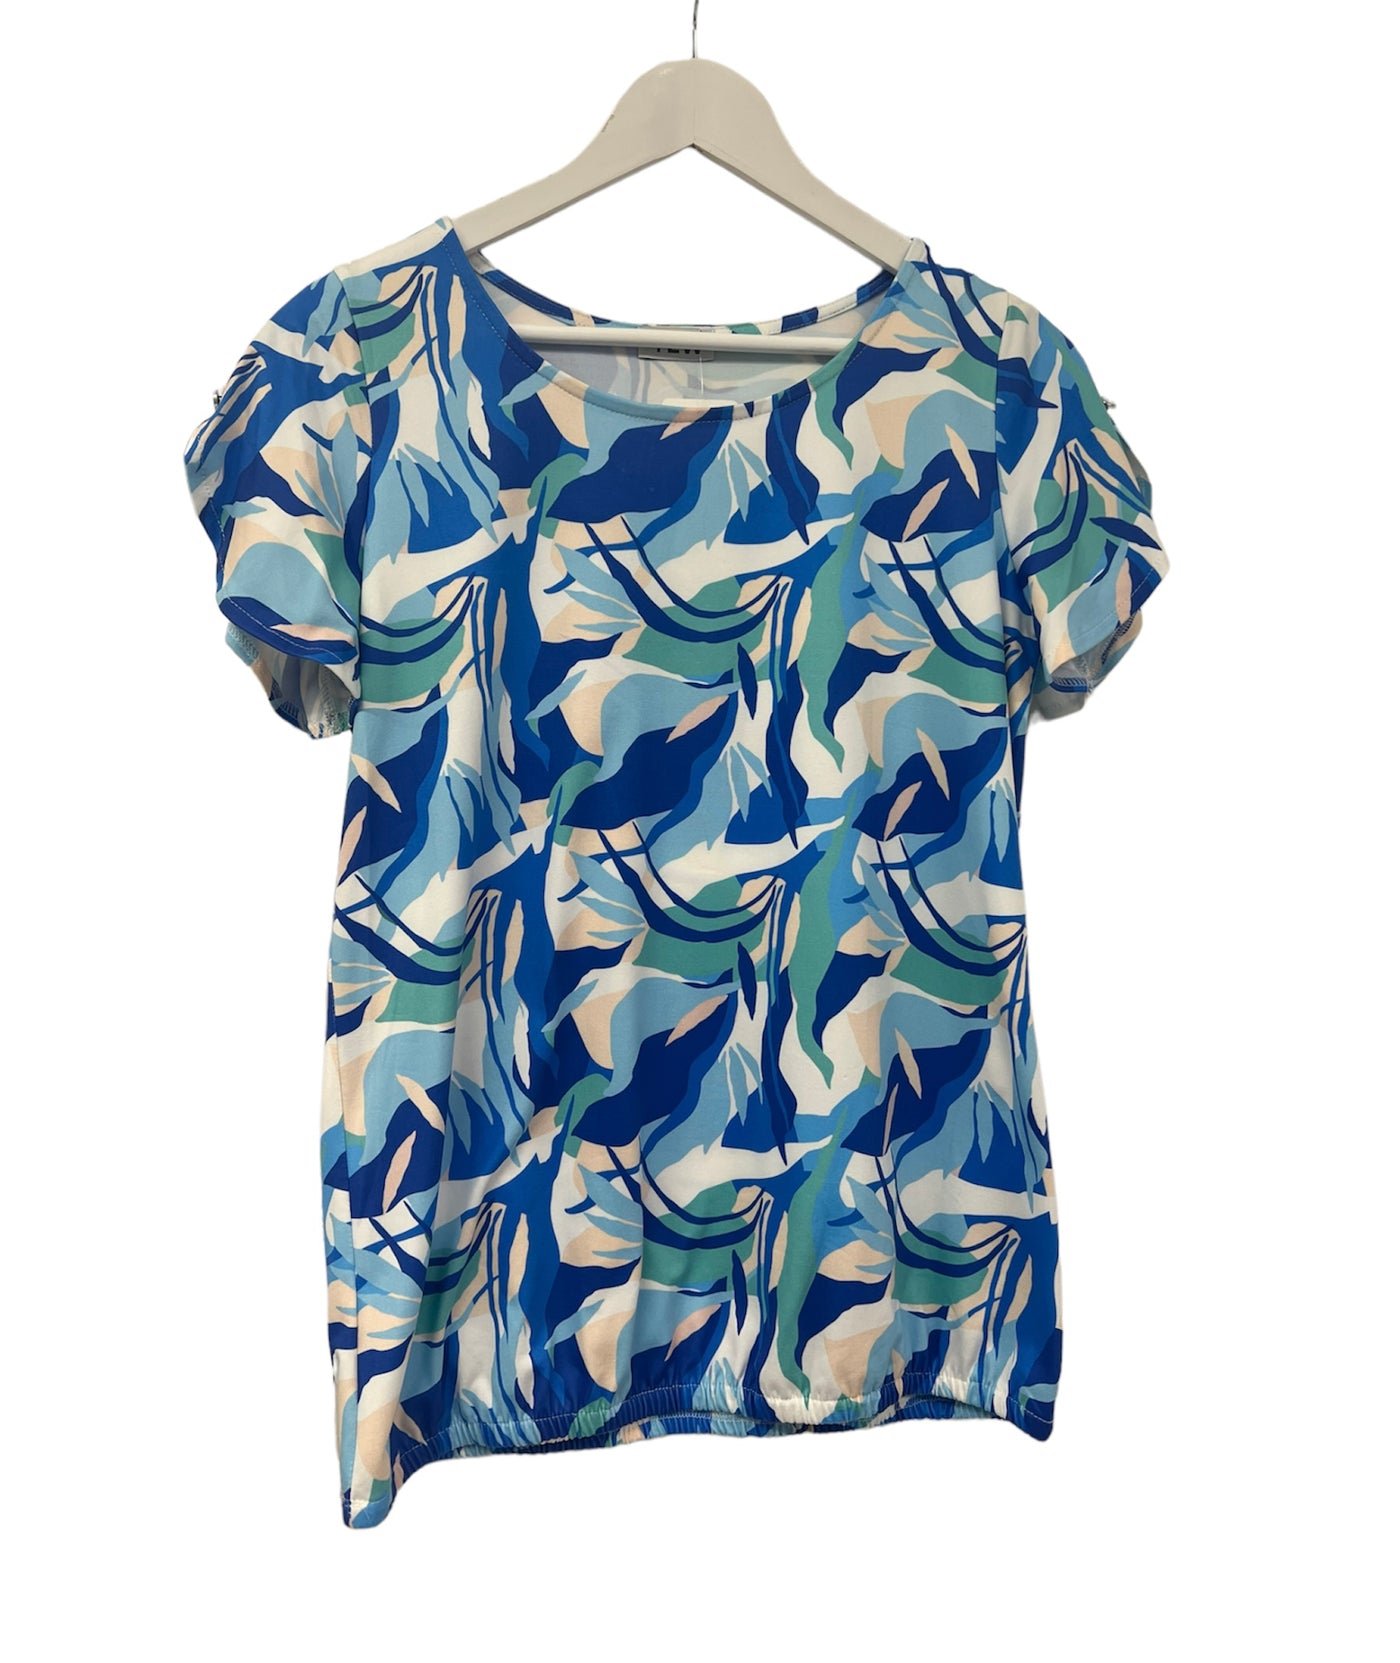 Blue/White/Green Abstract Print Short Sleeve Top With Elasitcated Band